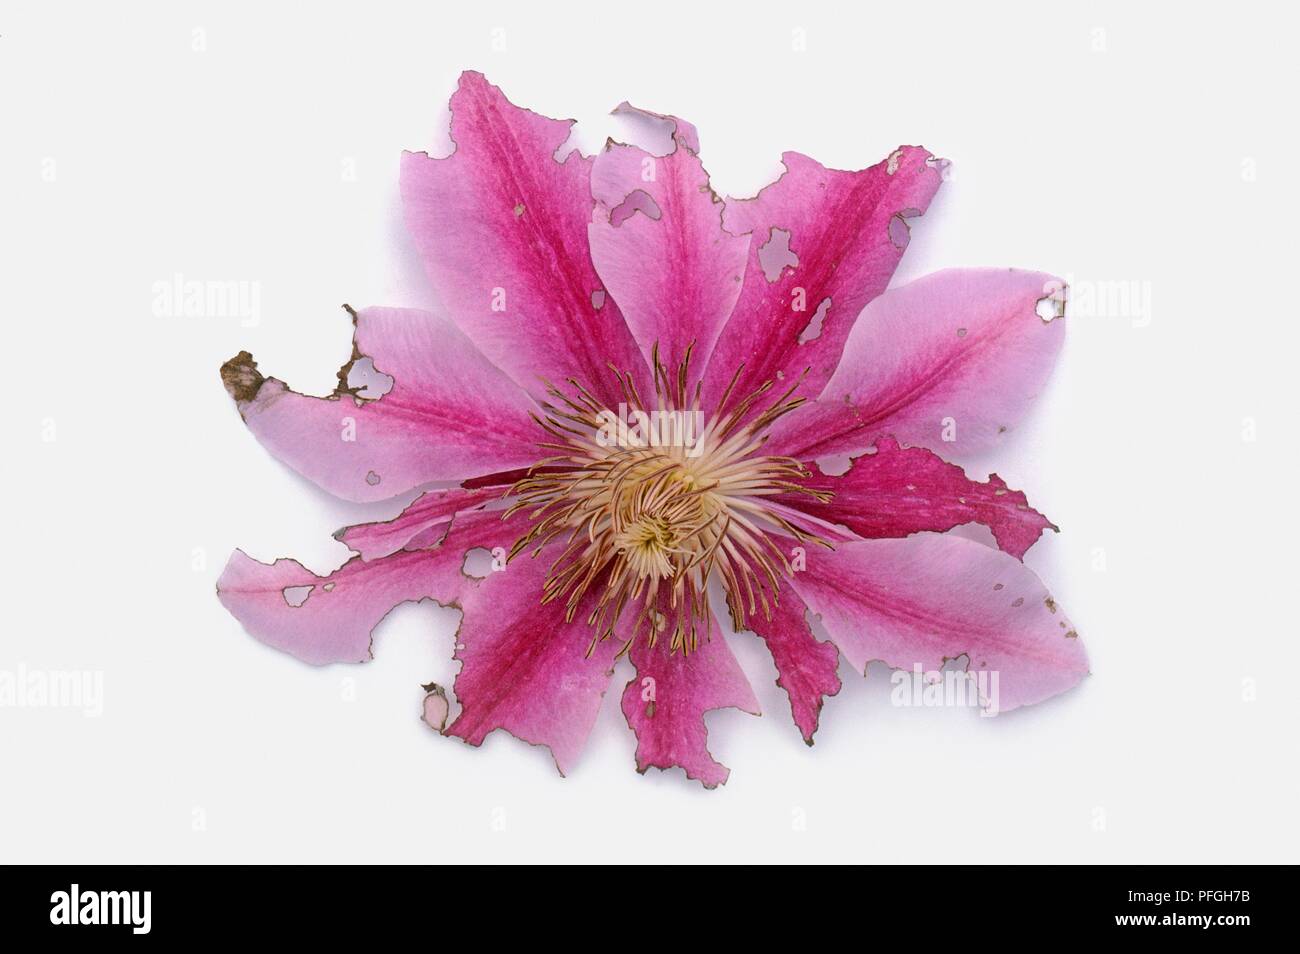 Clematis flower head damaged by Earwigs (Forficula auricularia), close-up Stock Photo